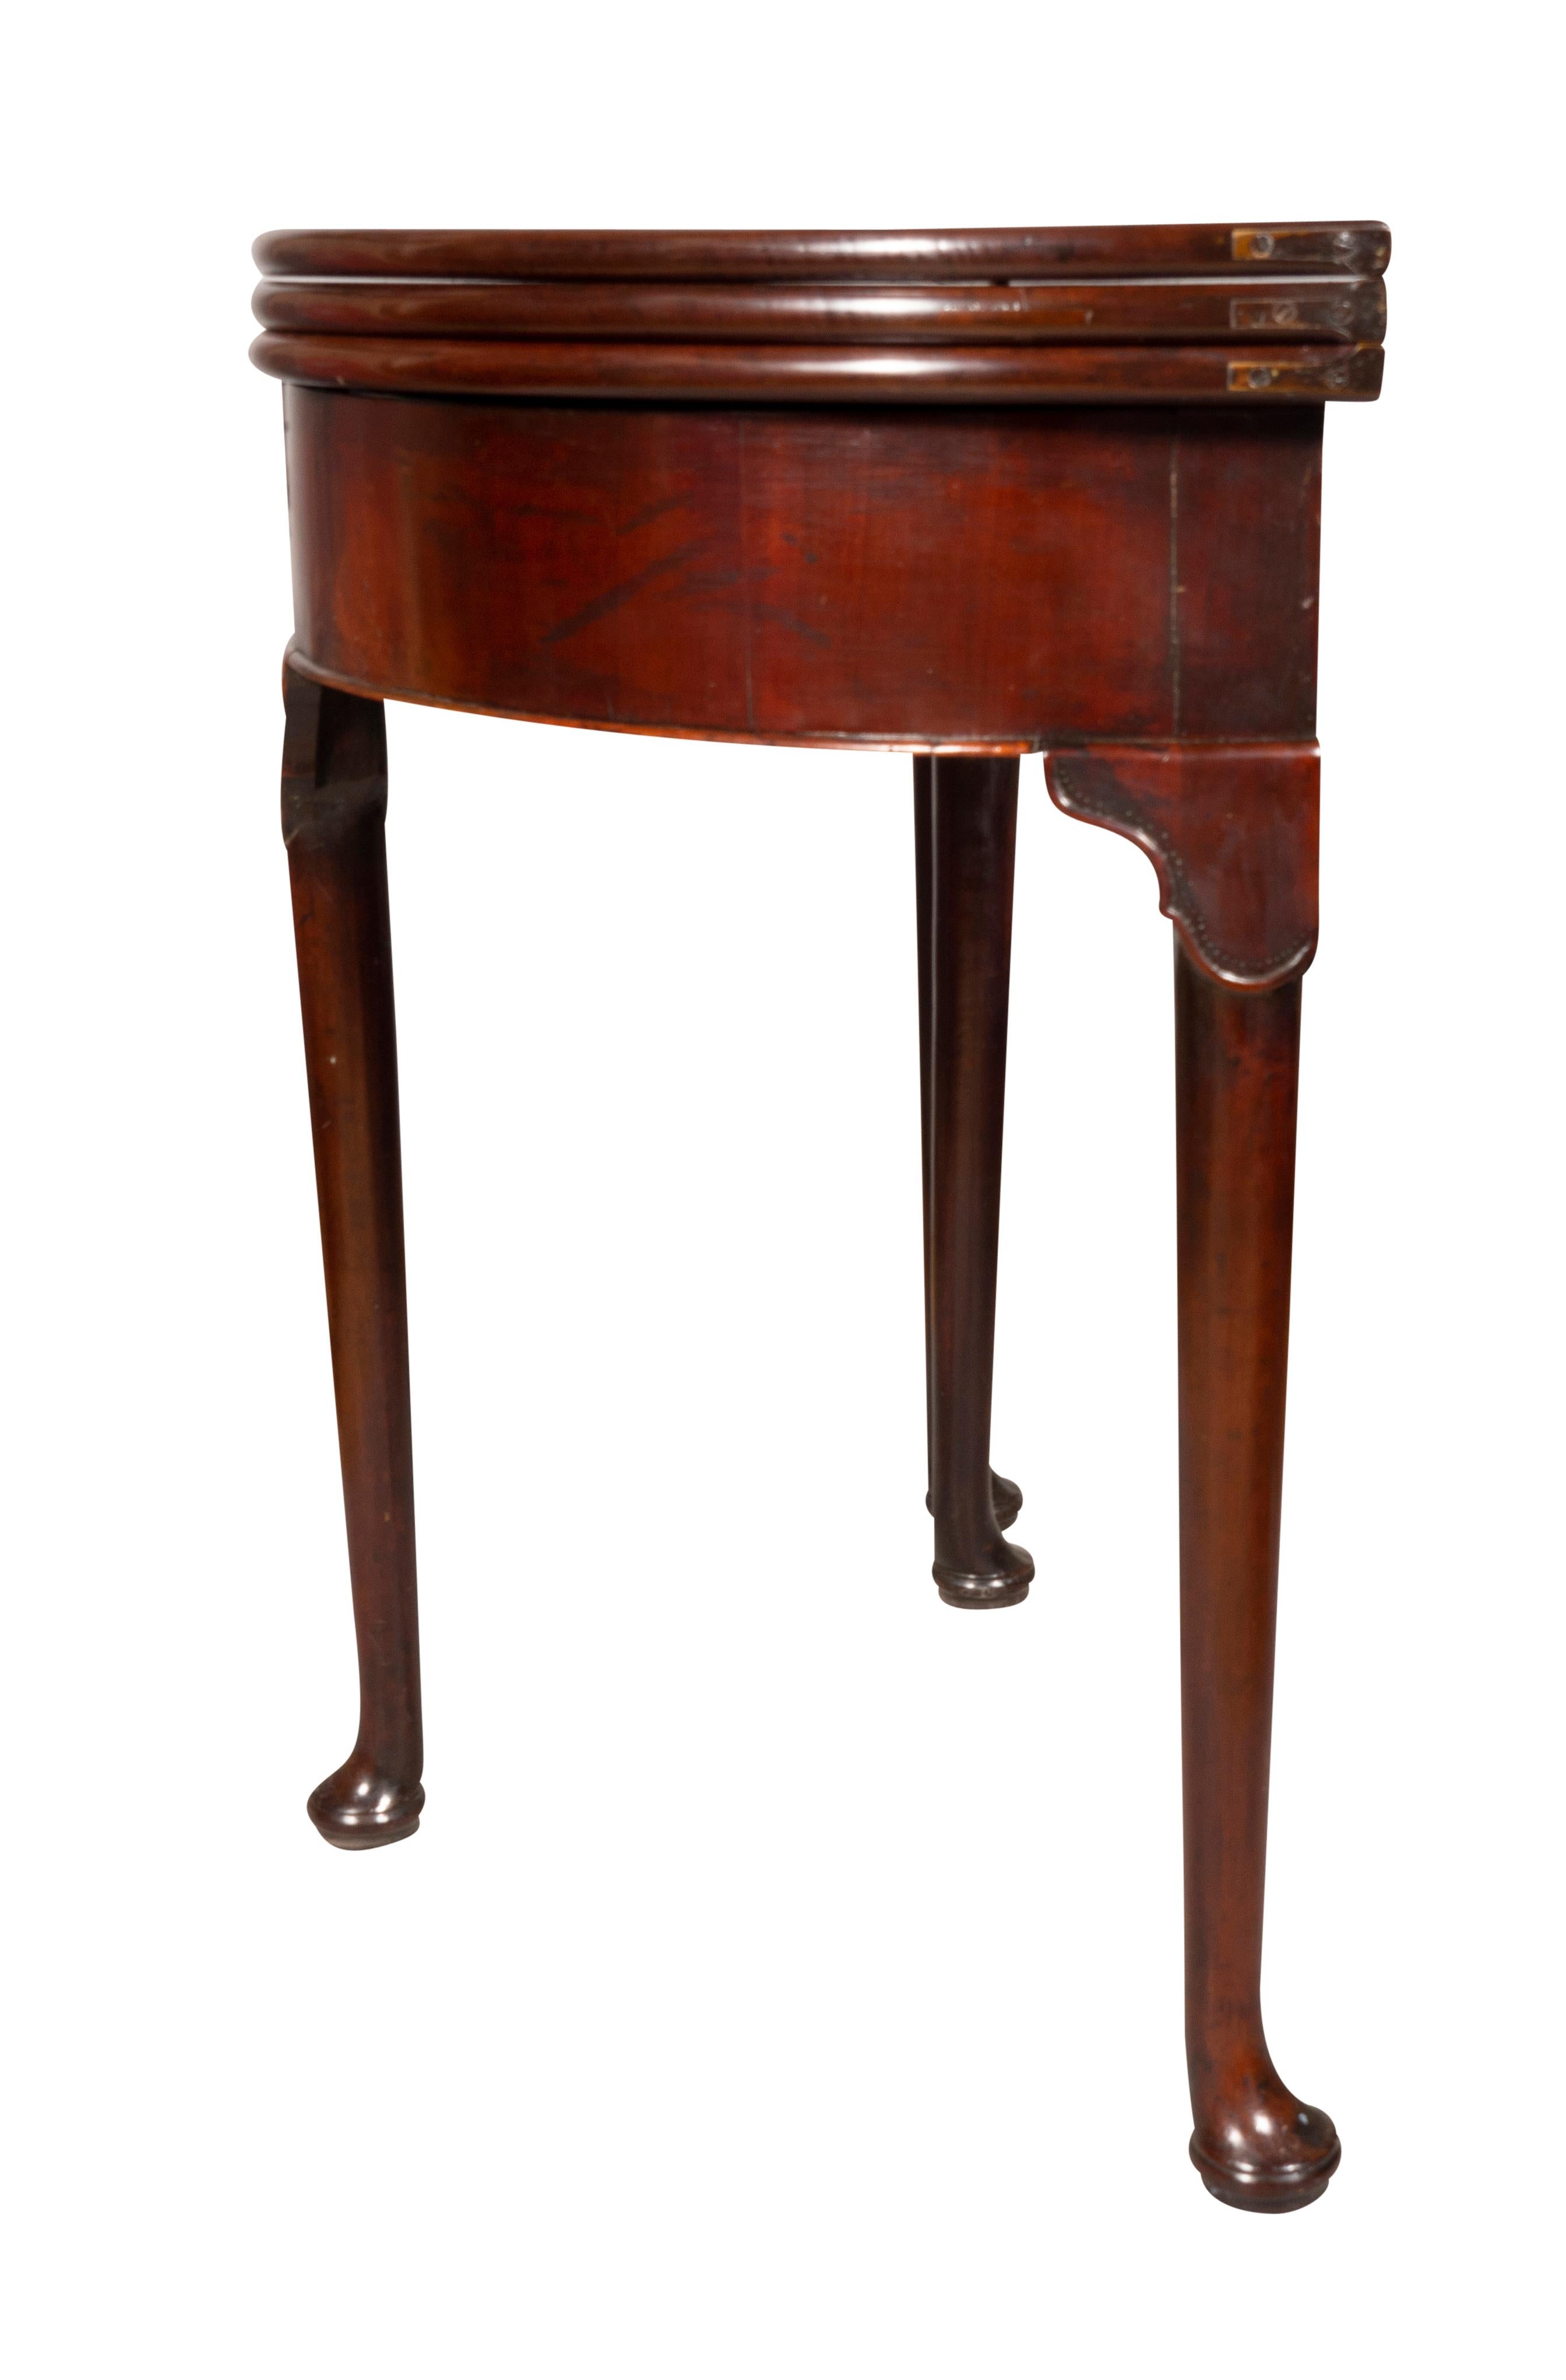 With triple top opening to a velvet playing surface. With interior well. Raised on circular tapered legs with carved lappet design at top of legs. Ending on pad feet.